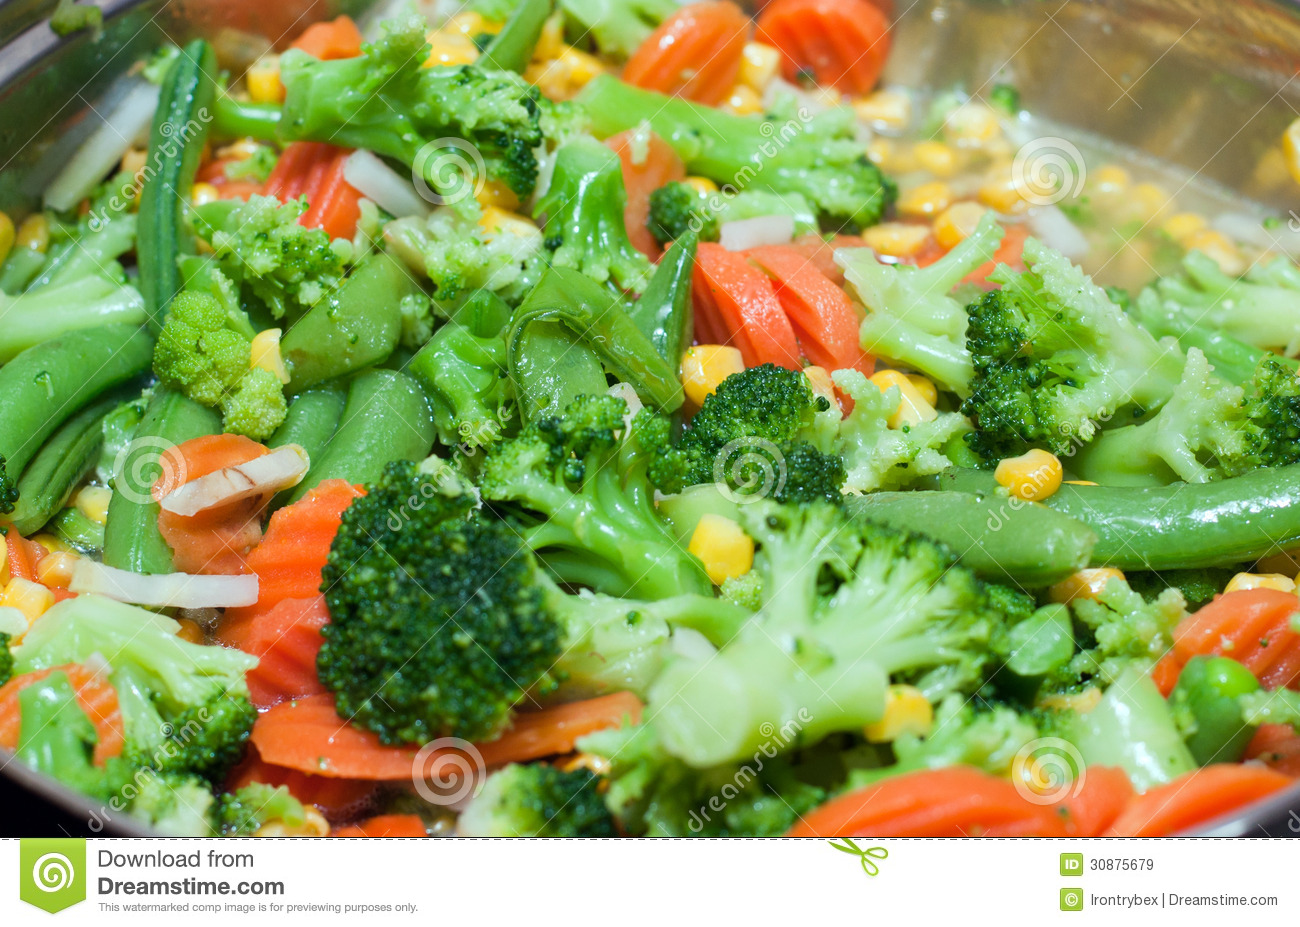 Mixed Vegetables Royalty Free Stock Images   Image  30875679